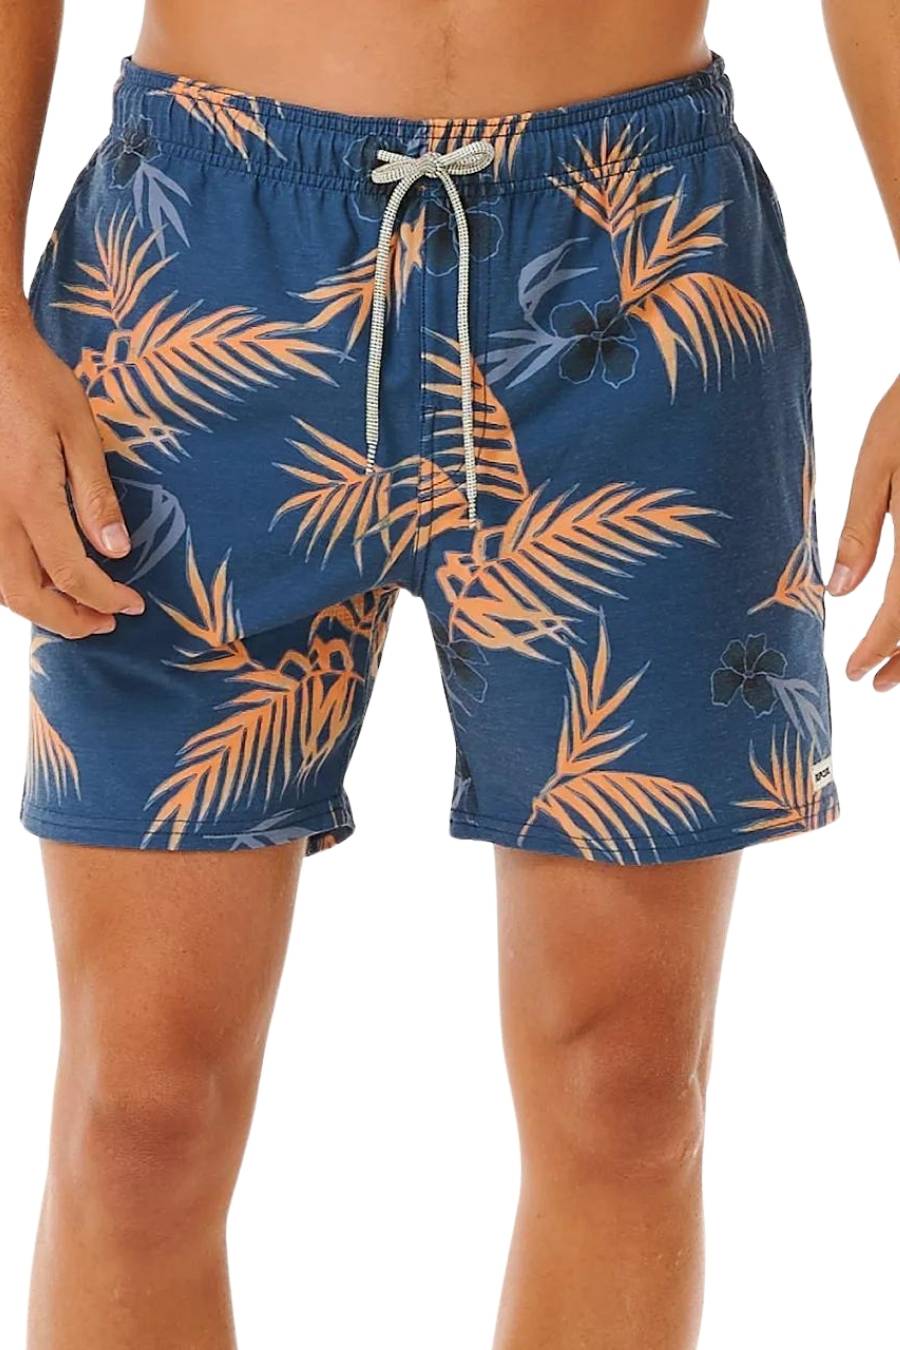 RIP CURL ανδρικό μαγιό SURF REVIVAL FLORAL VOLLEY - Μπλε-RIP08BMBO-124-BLUE